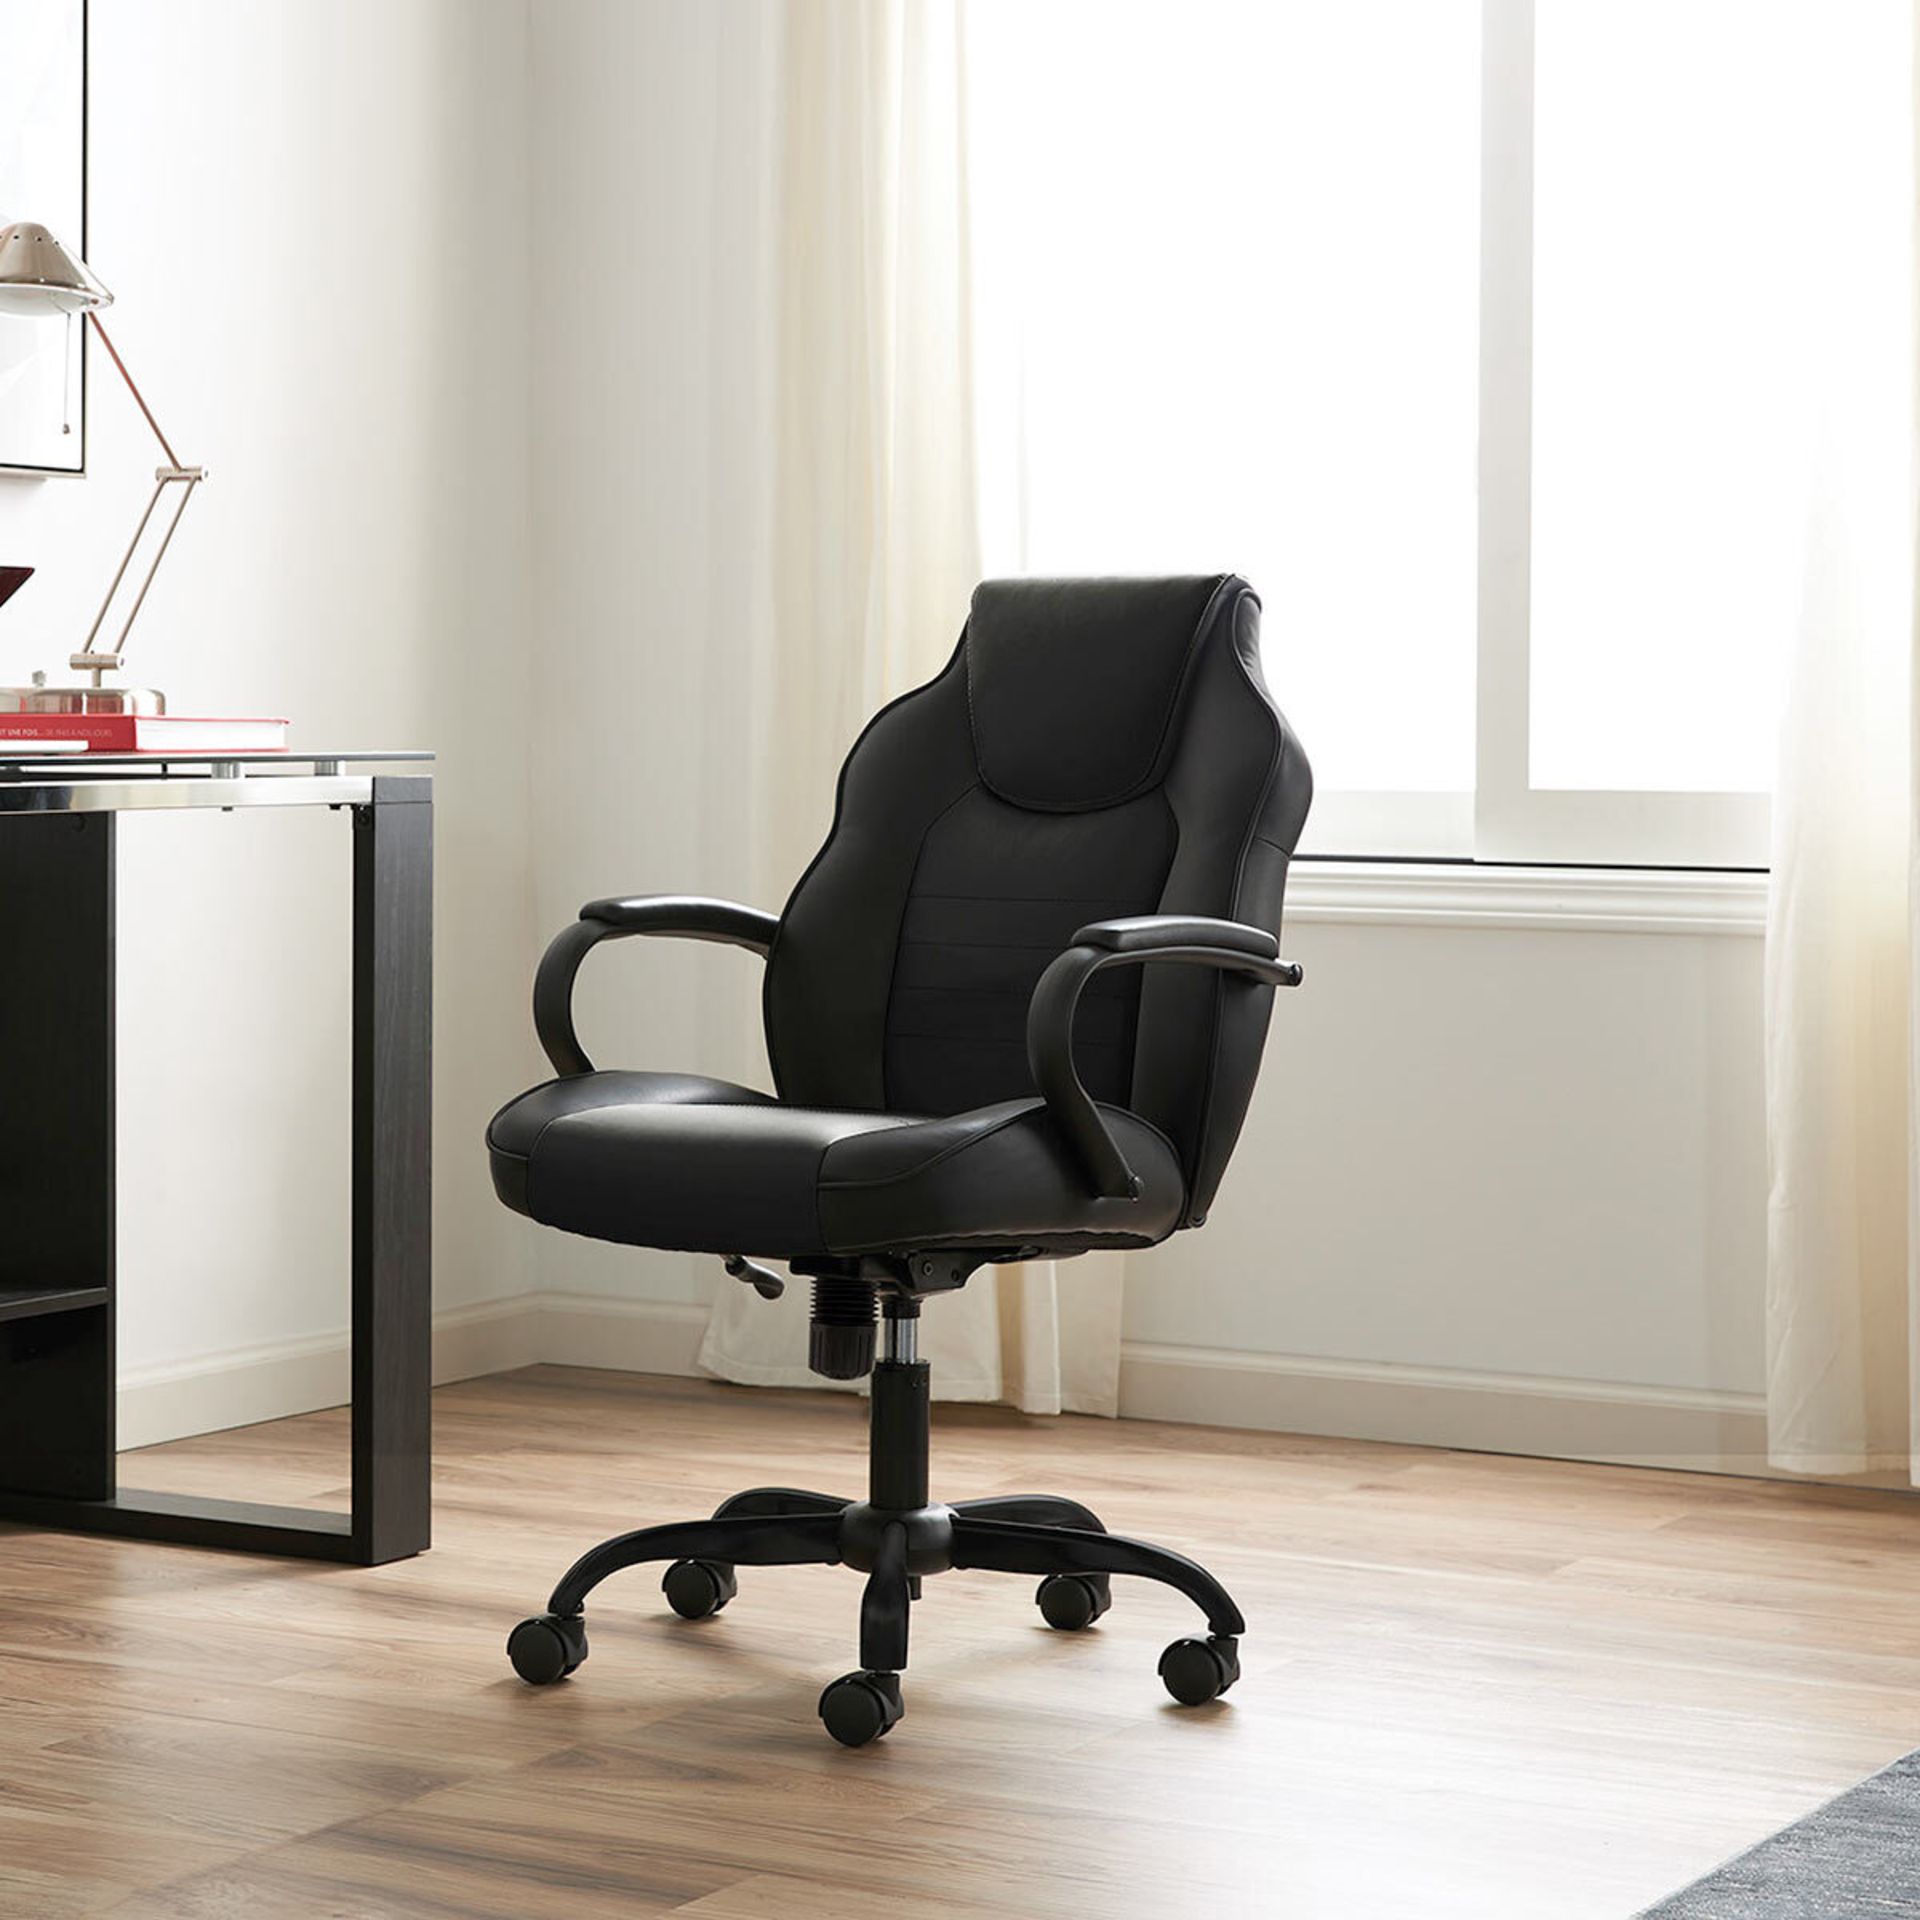 1 TRUE INNOVATIONS BACK TO SCHOOL OFFICE CHAIR RRP Â£99